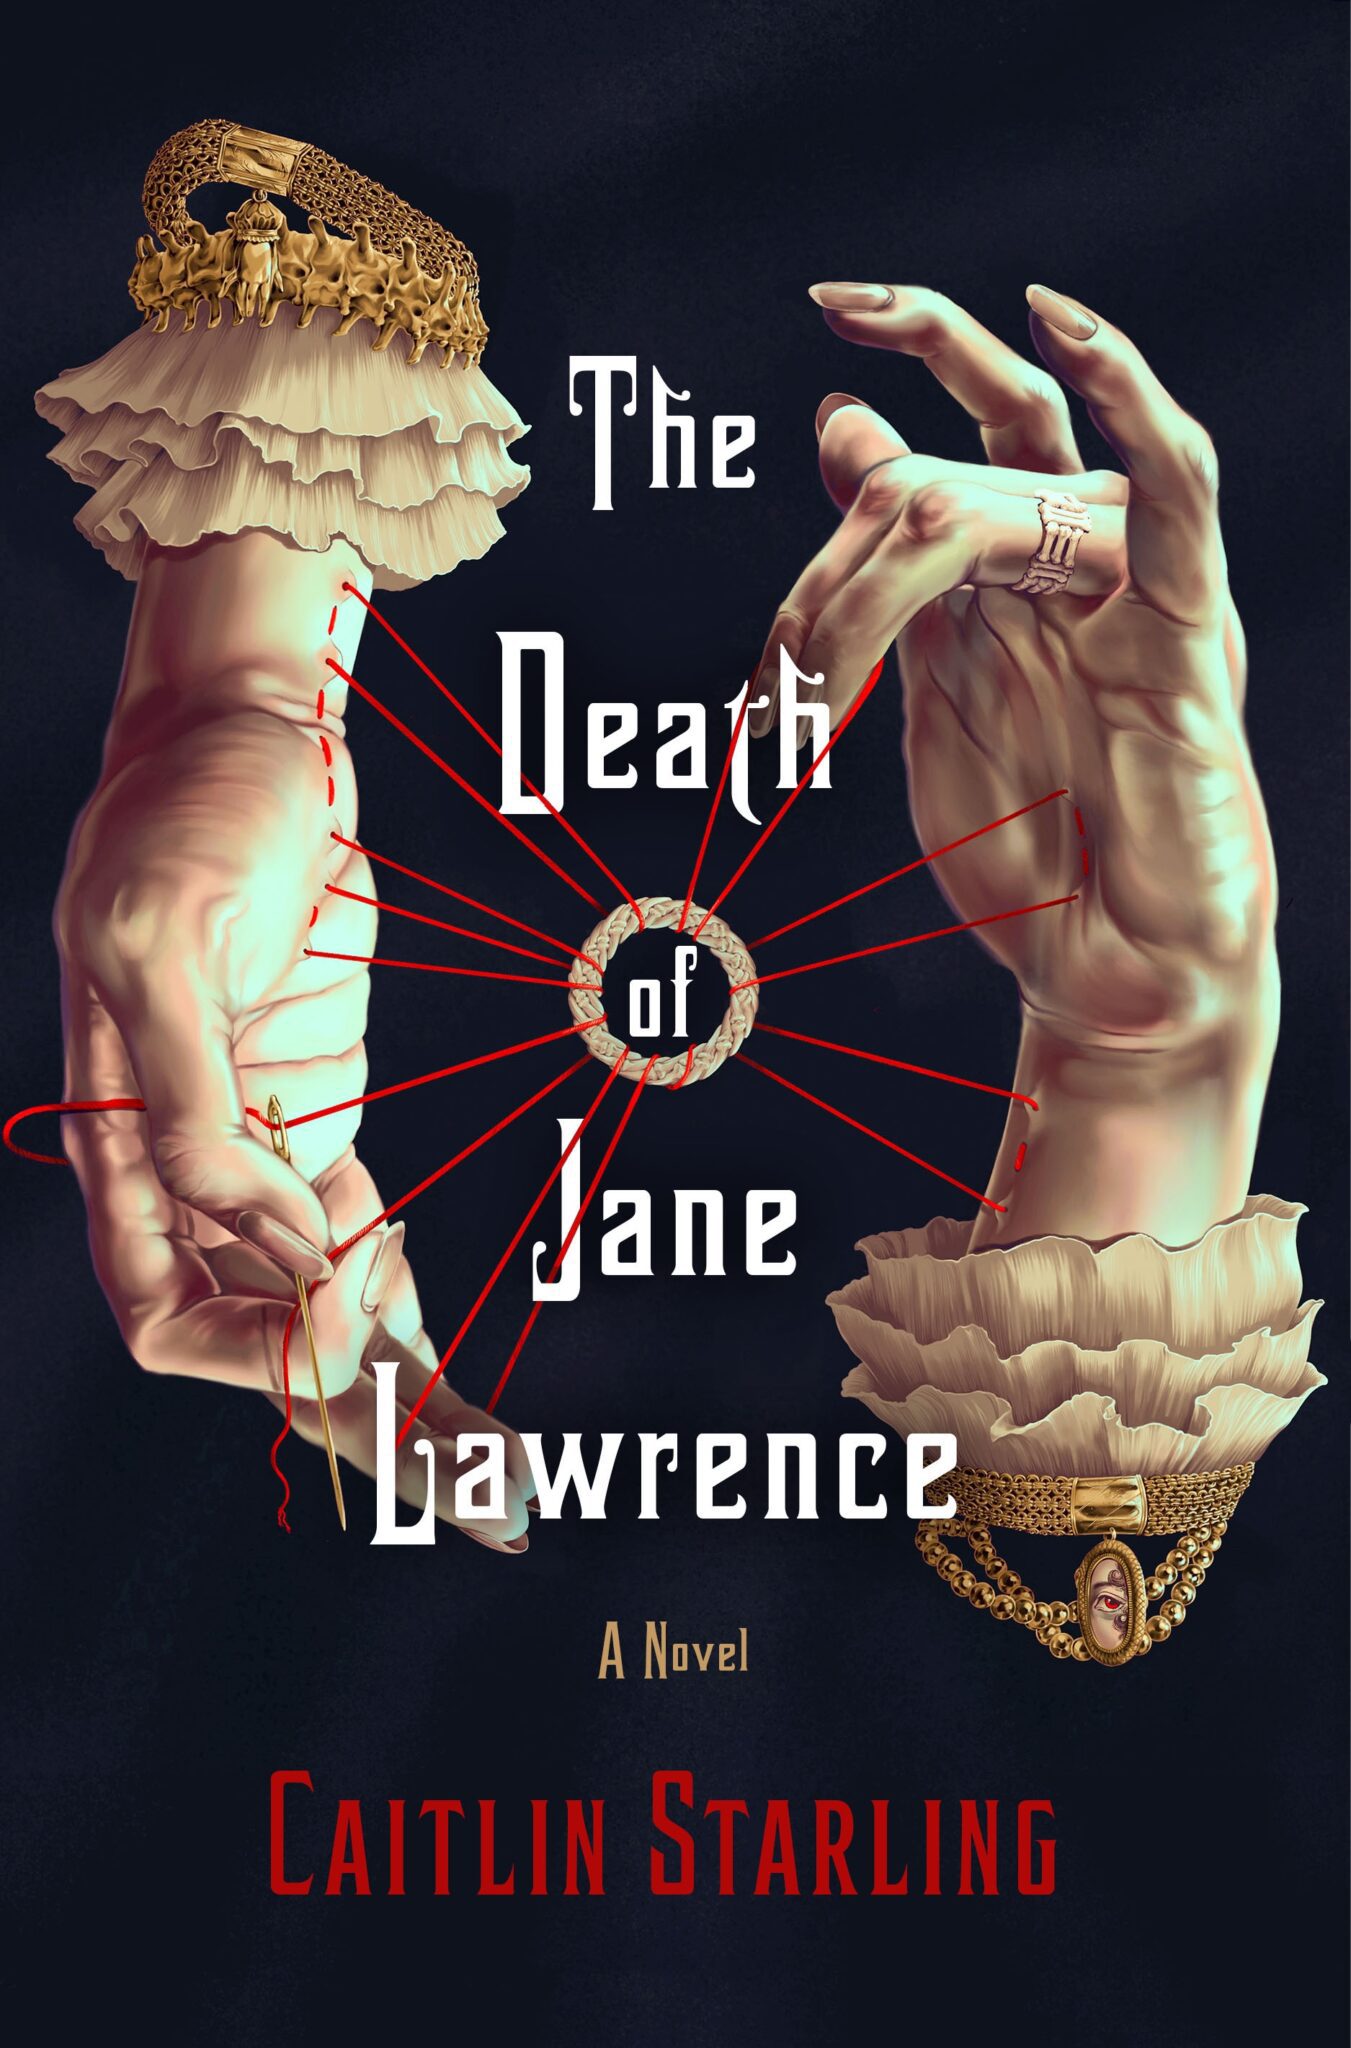 Caitlin Starling: Five Things I Learned Writing The Death of Jane Lawrence